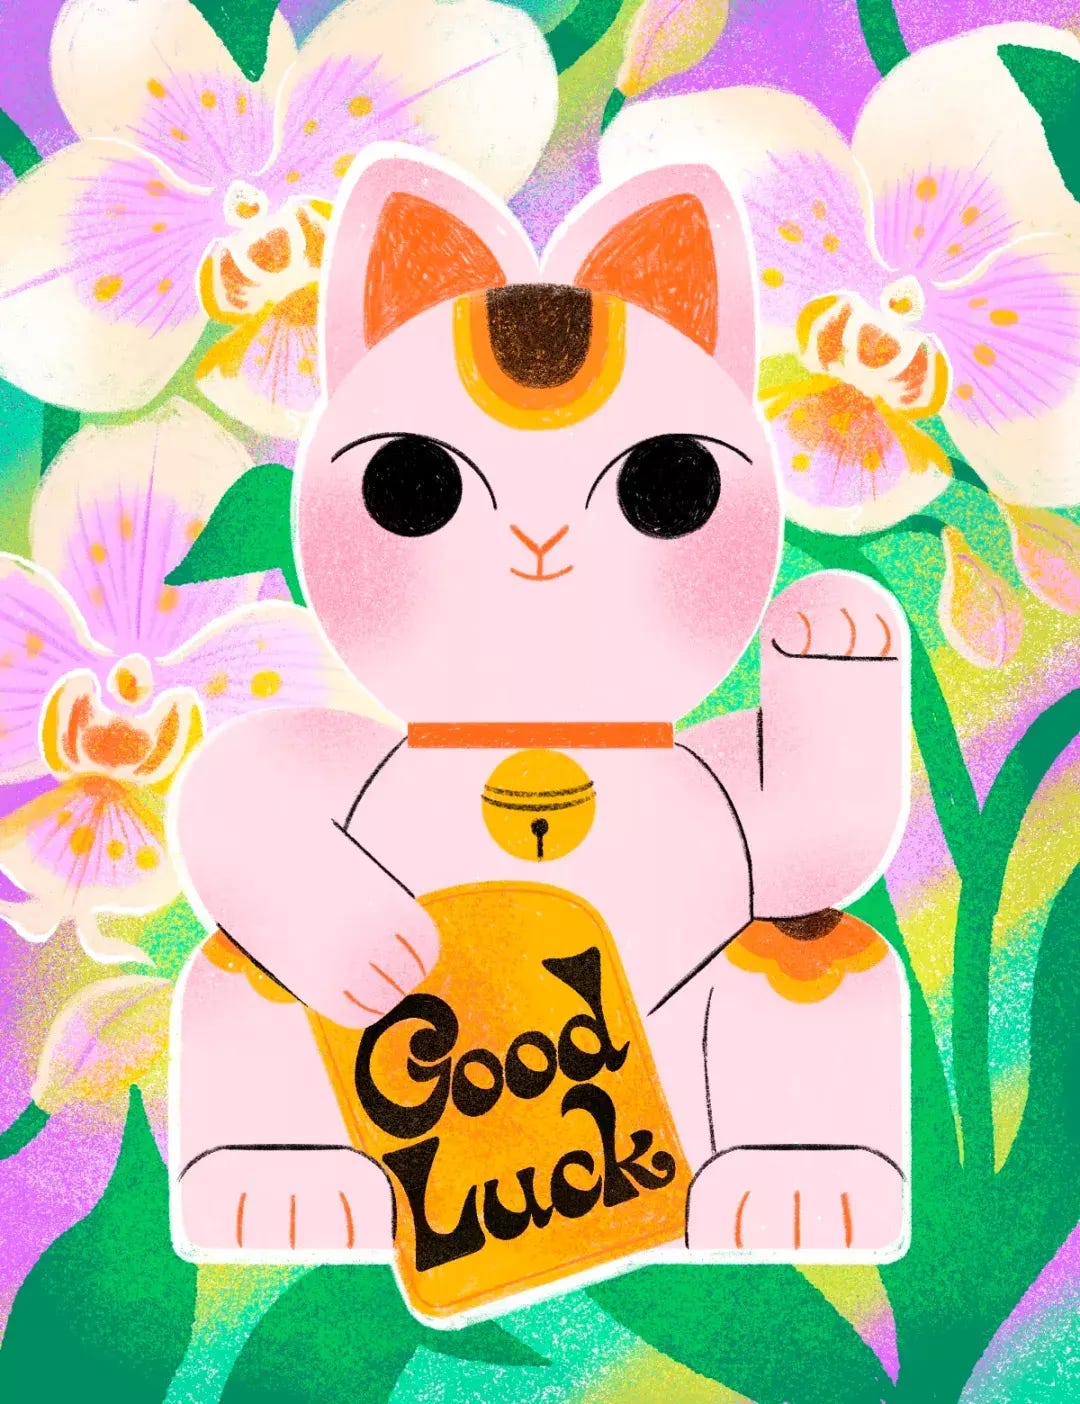 A pink Japanese maneki-neko, or beckoning cat, surrounded by blossoming flowers, holds up a sign that says "good luck".